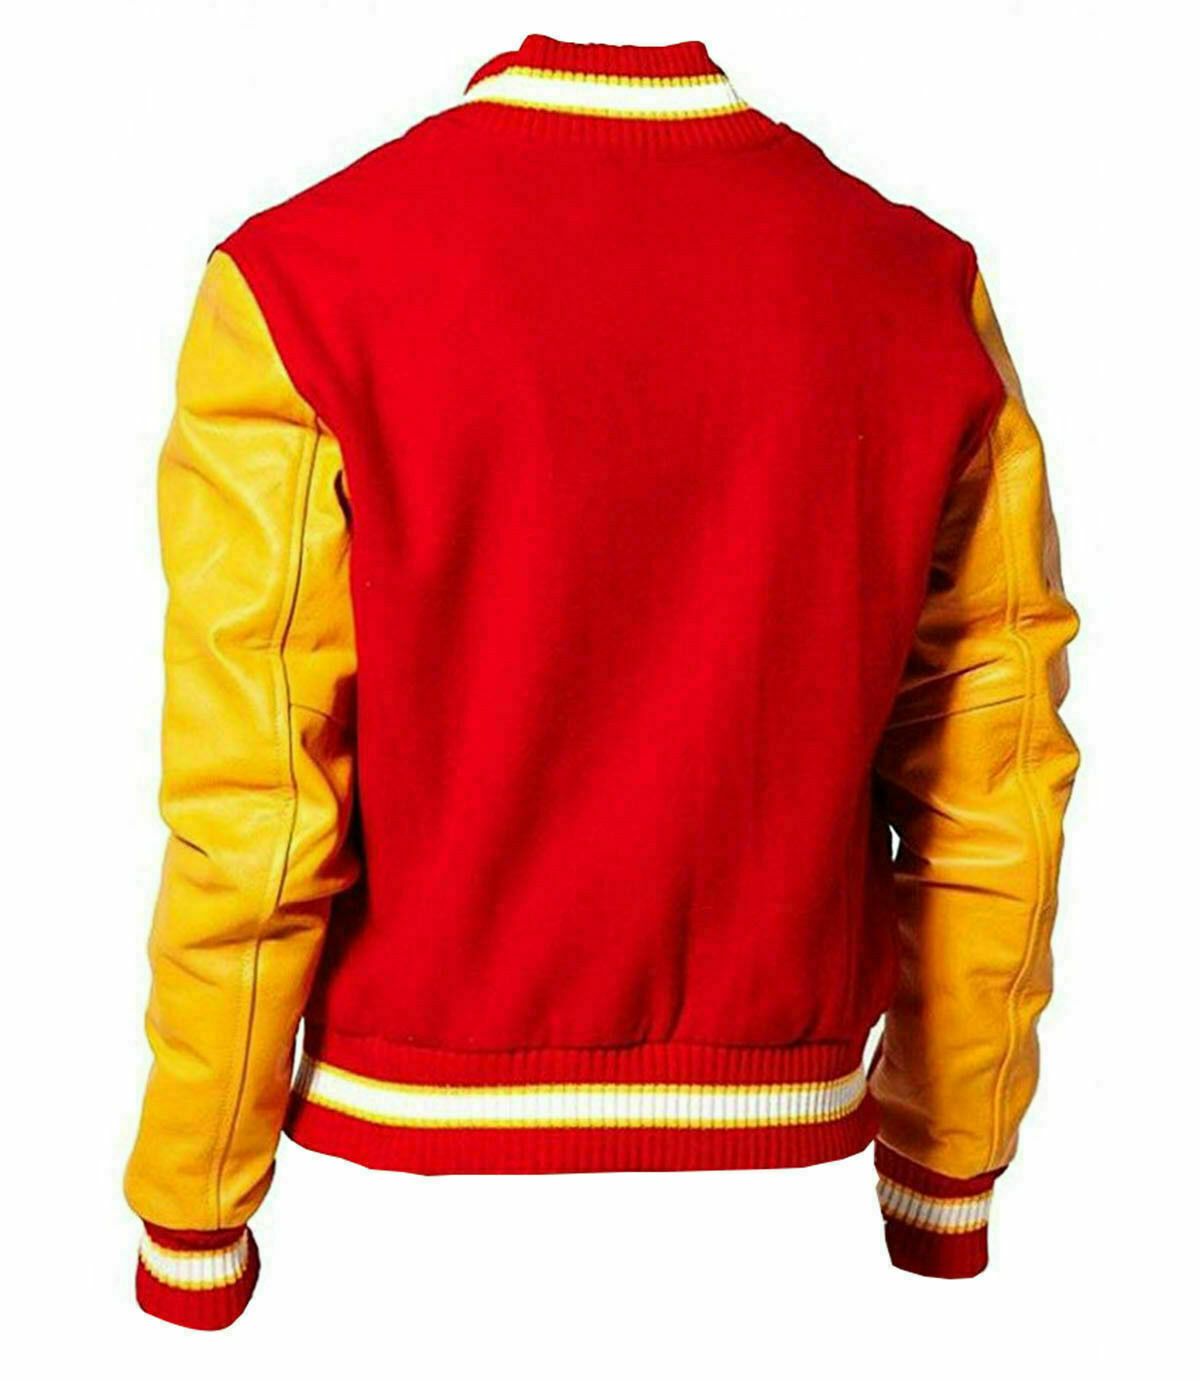 Spine Spark Michael Jackson Red Wool Varsity Jacket Yellow Leather Sleeves